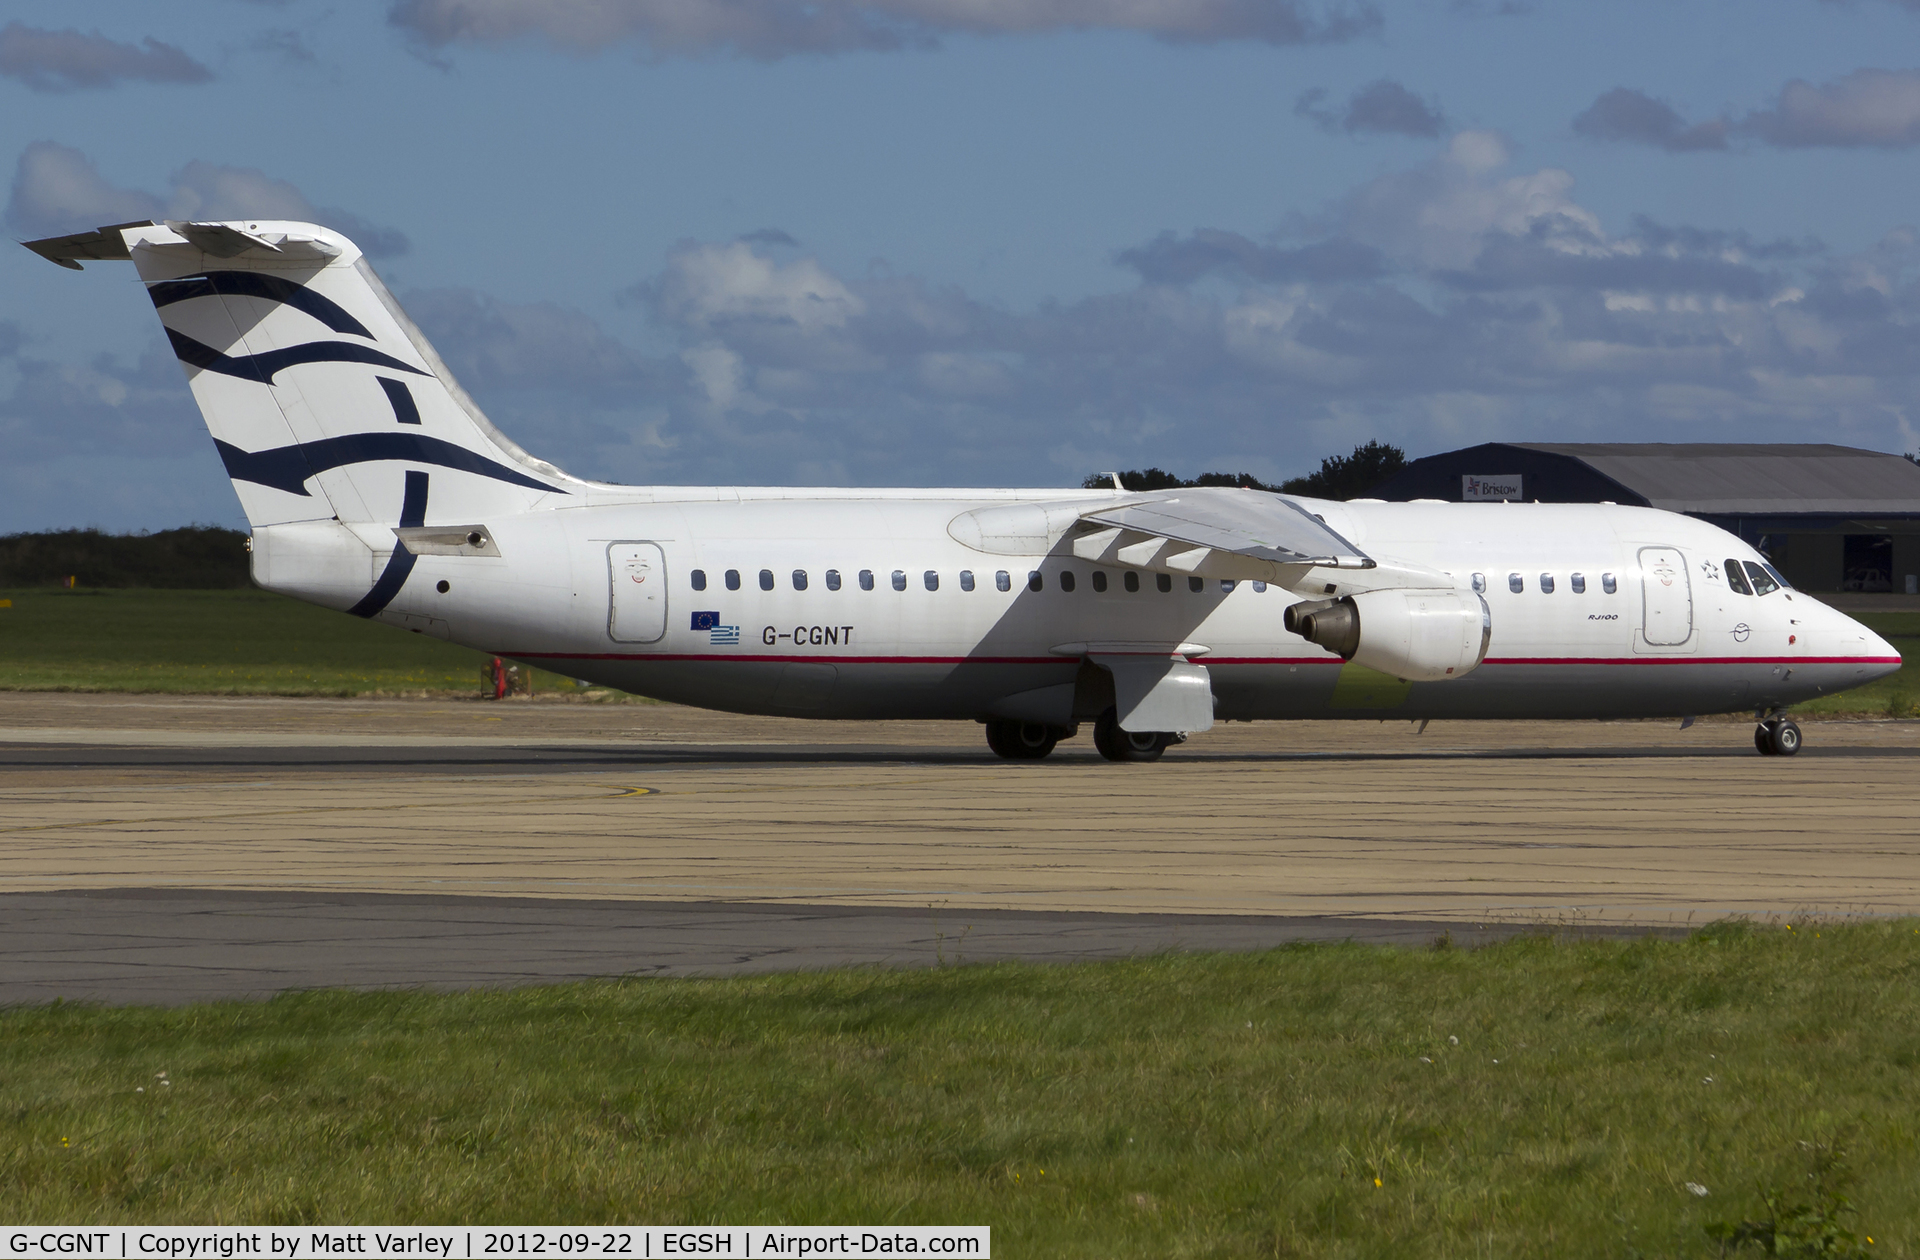 G-CGNT, 2000 Avro RJ100 C/N E.3374, Arriving at EGSH for spray by Air Livery.